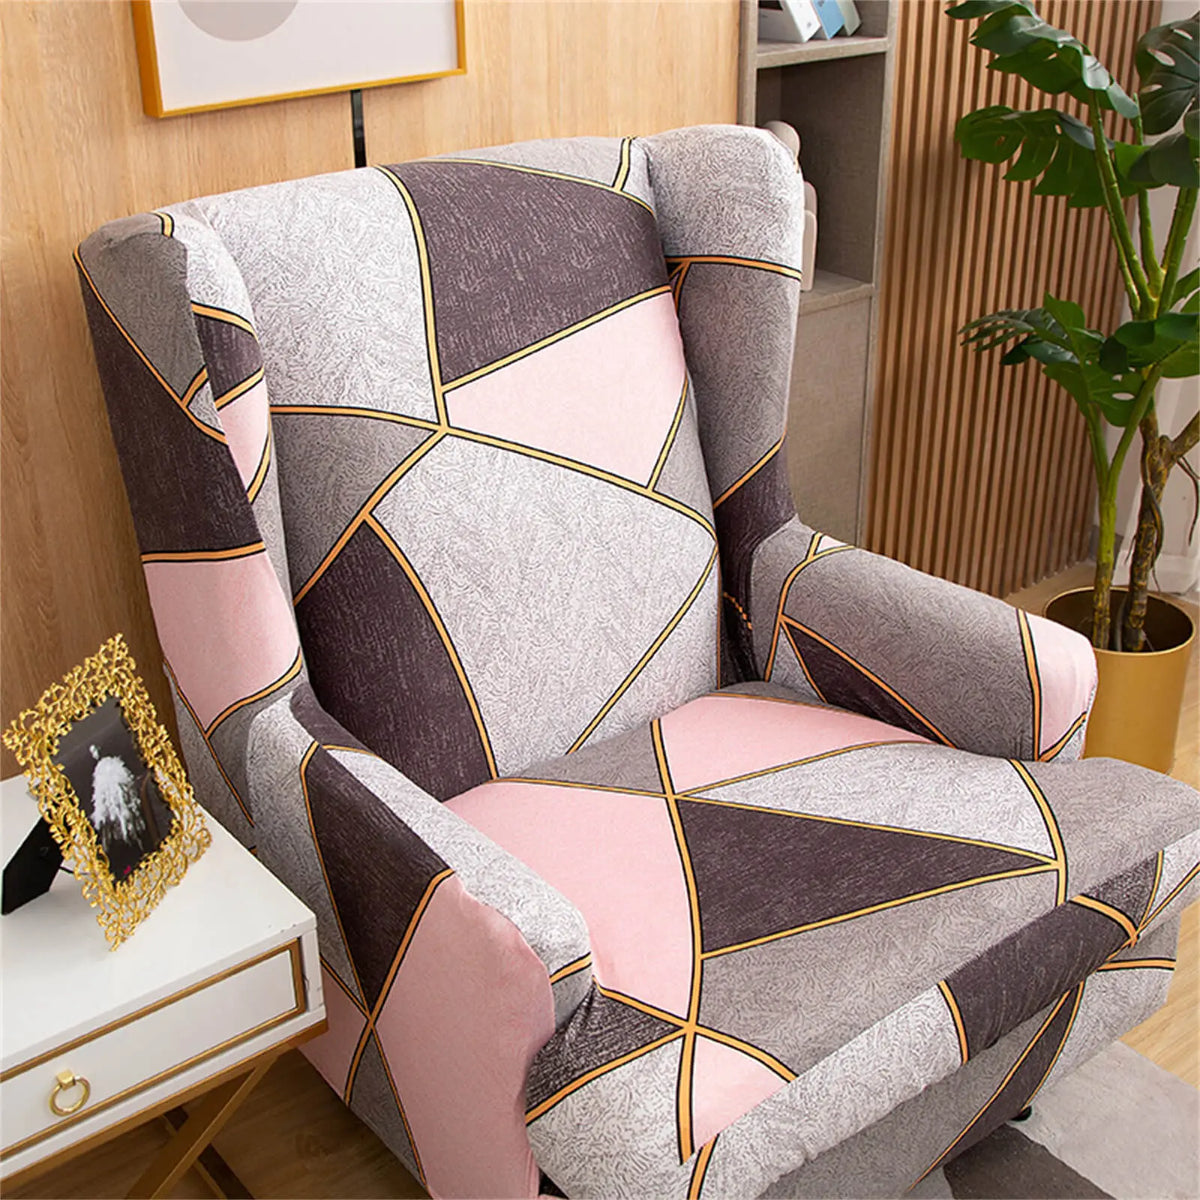 2 Piece Wingback Chair Covers Floral Patterned Chair Cover for Living Room